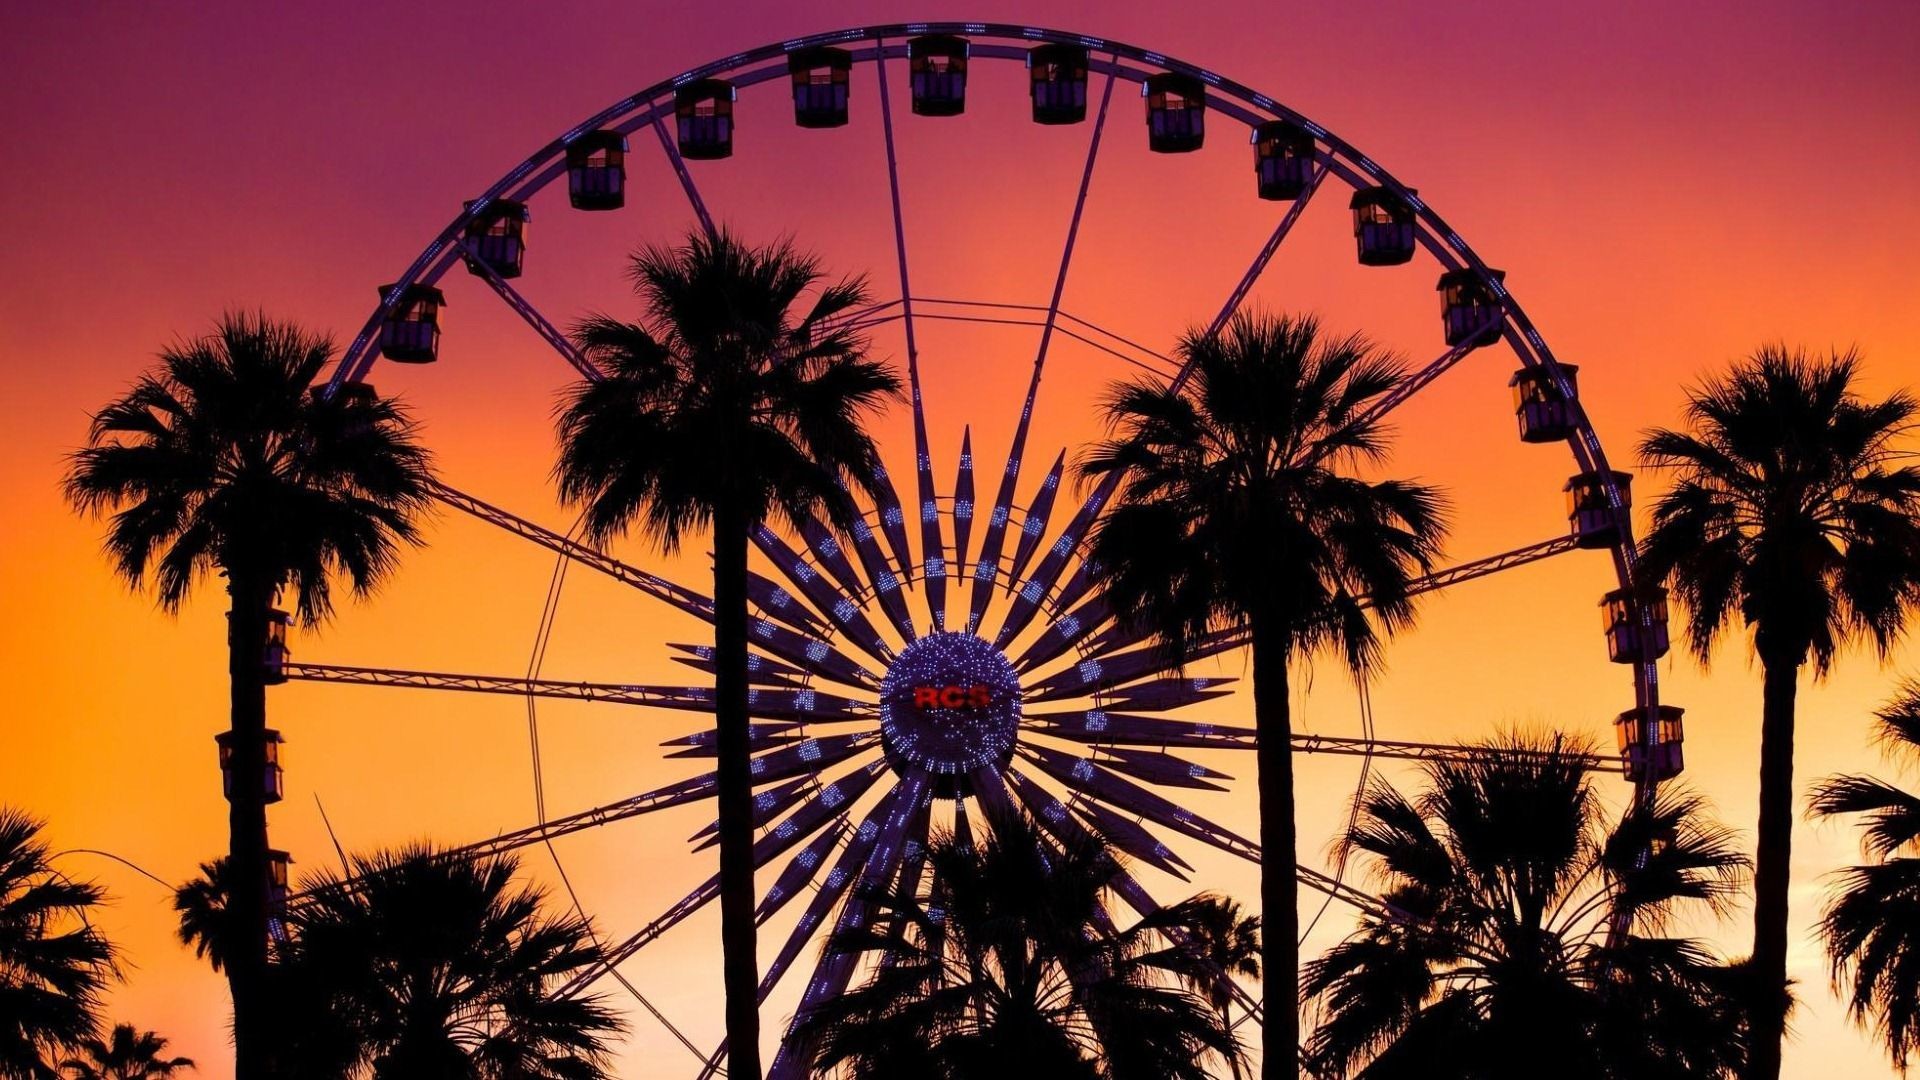 1920x1080 Coachella Valley Music And Arts Festival HD Wallpapers 26884 - Baltana